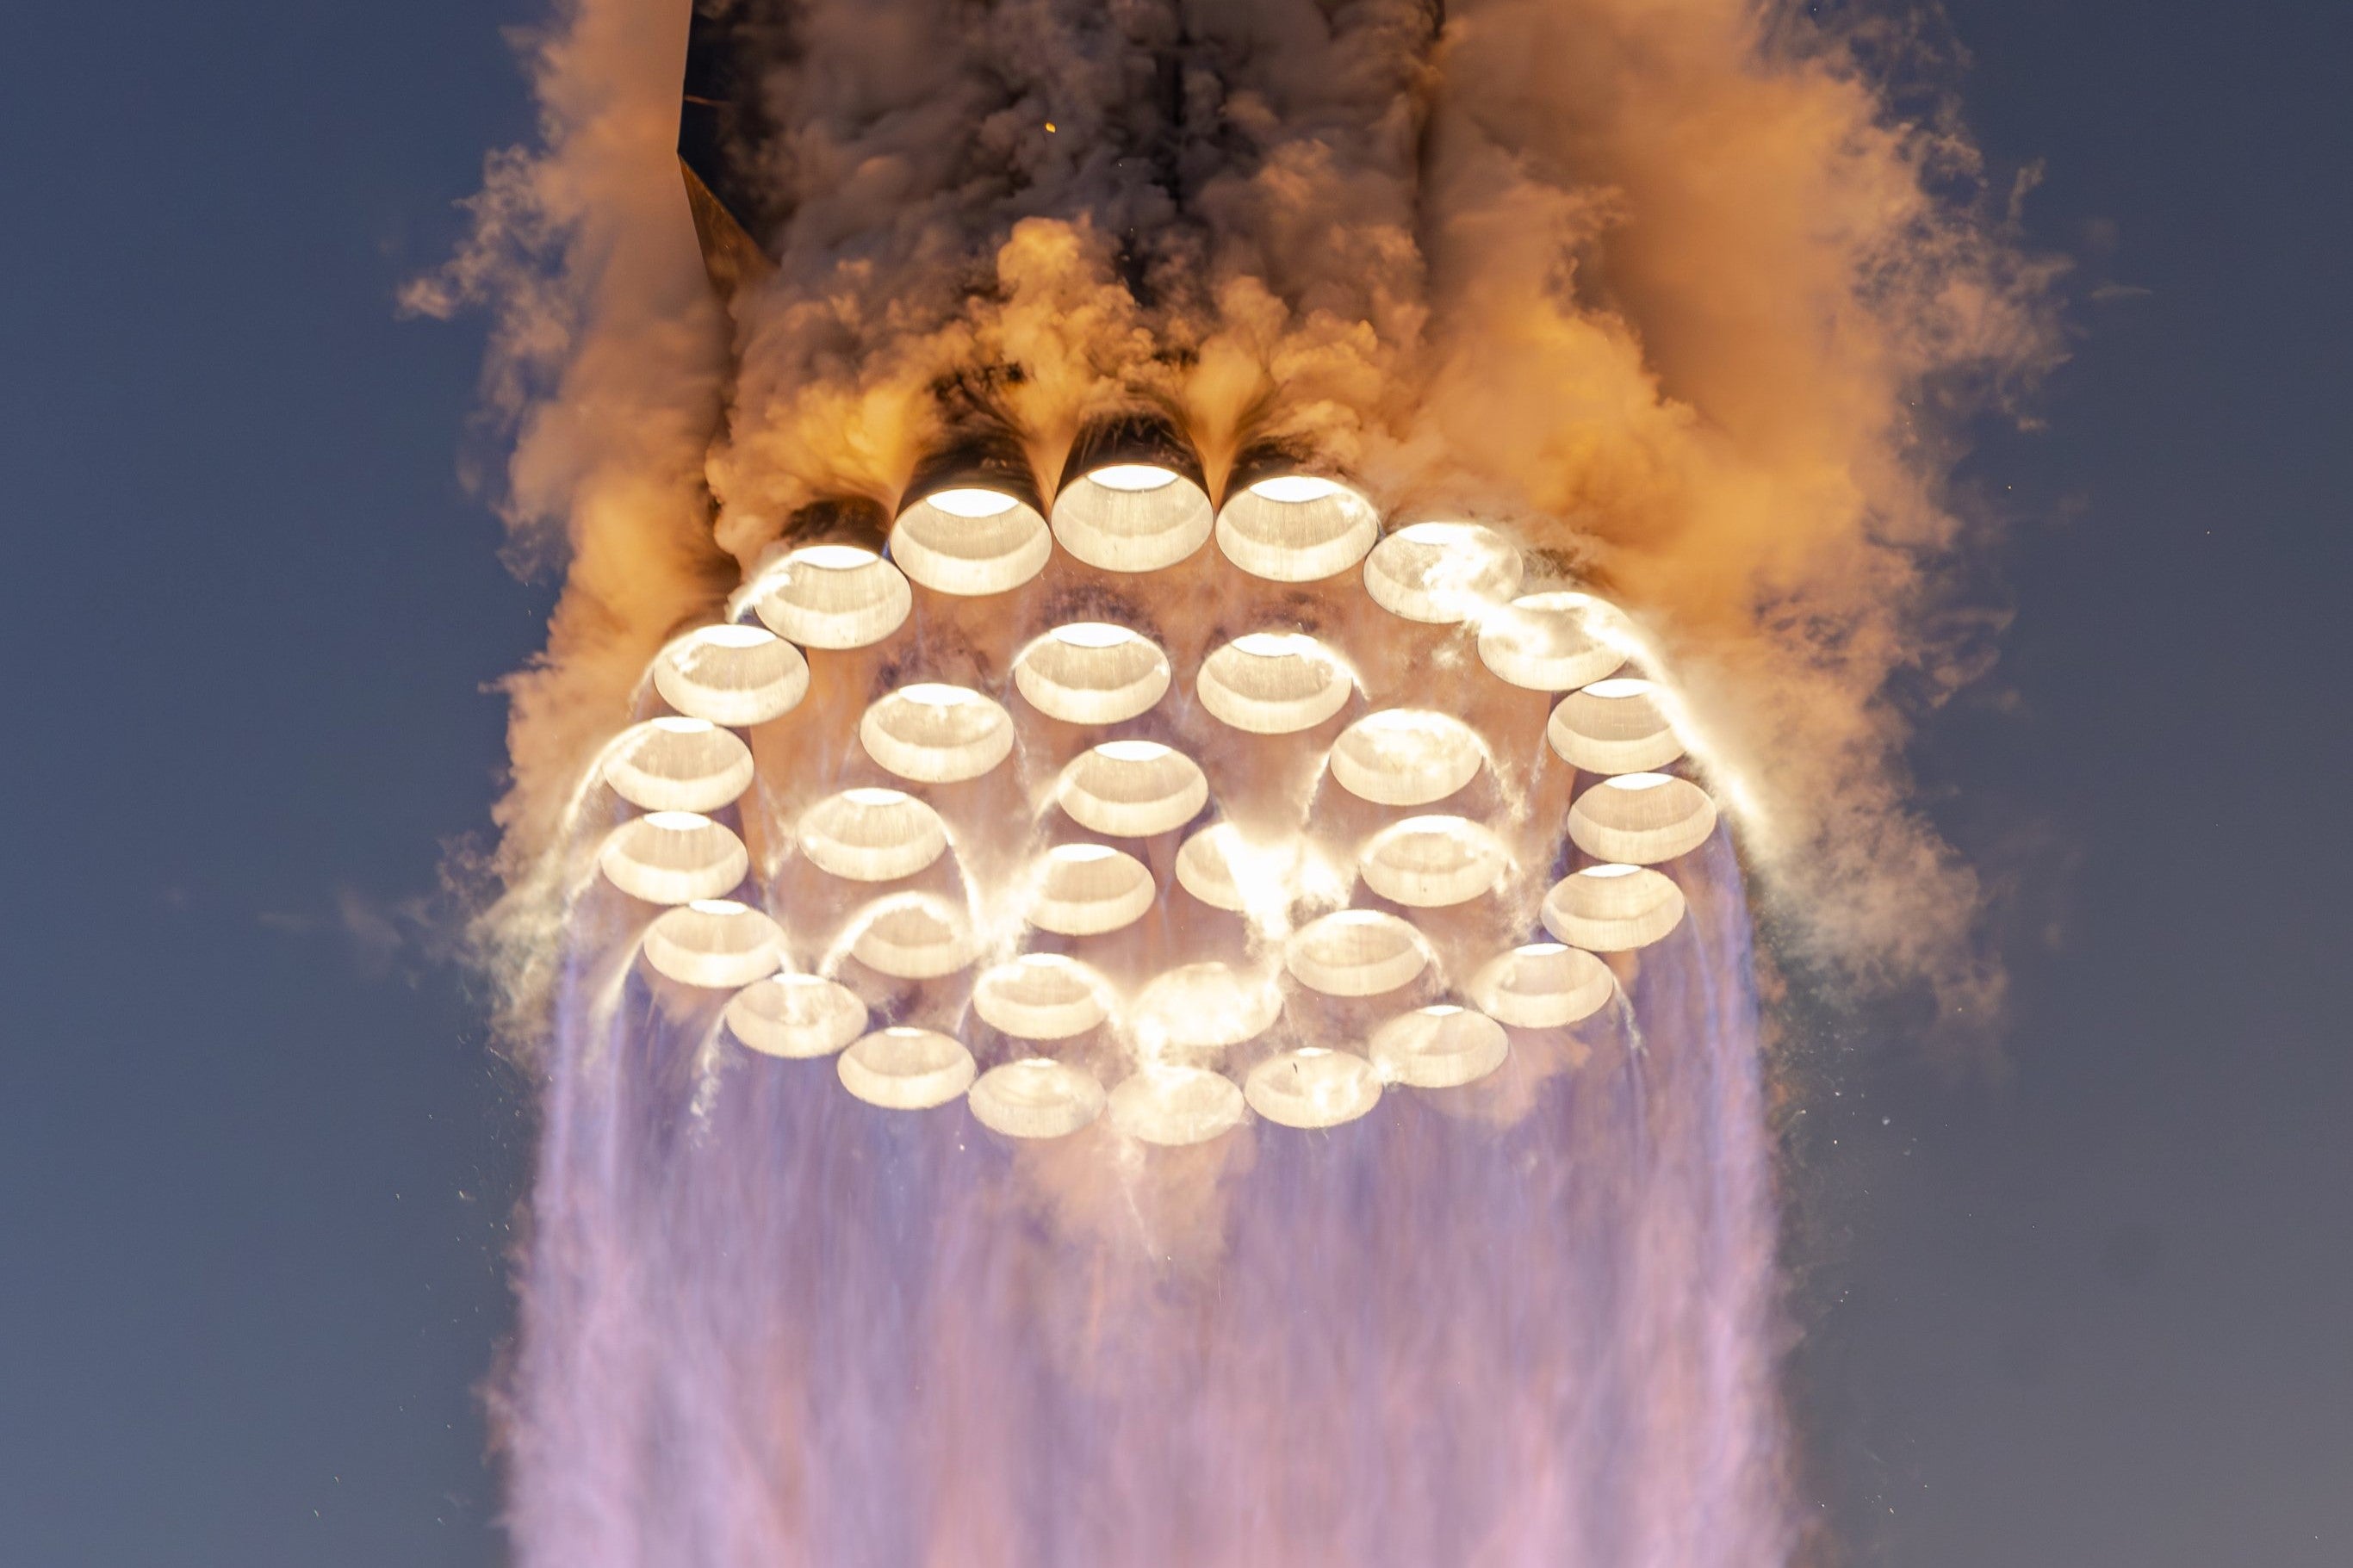 The 33 Raptor engines of SpaceX’s Starship rocket during a test launch on 18 November 2023